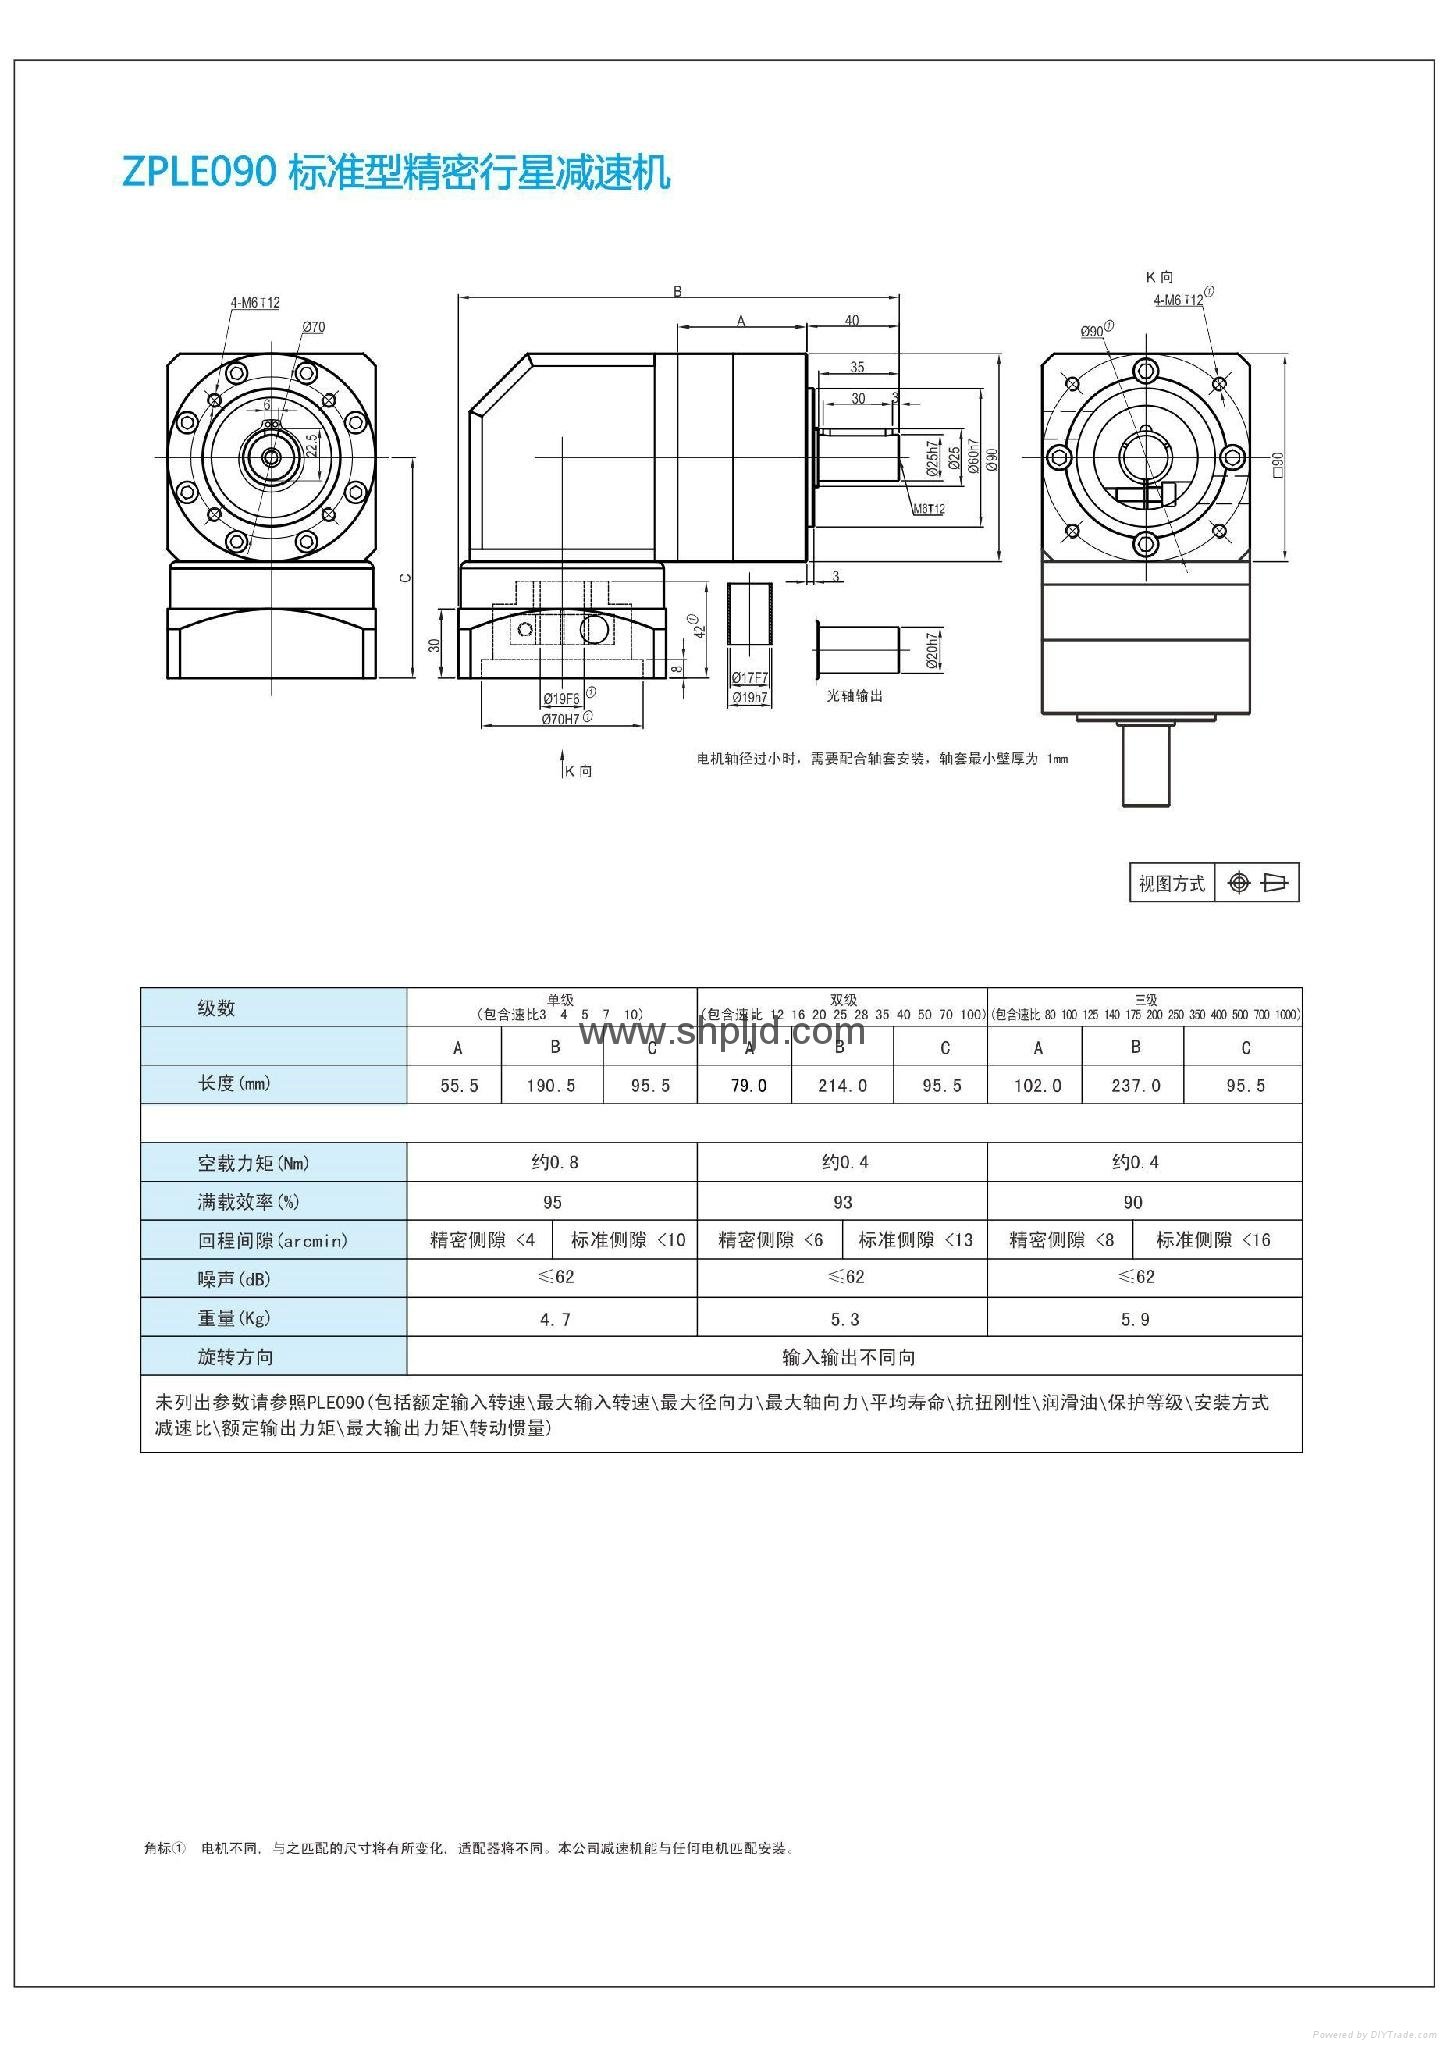 ZPLE right angle precsion planetary gearbox for servo stepper motor